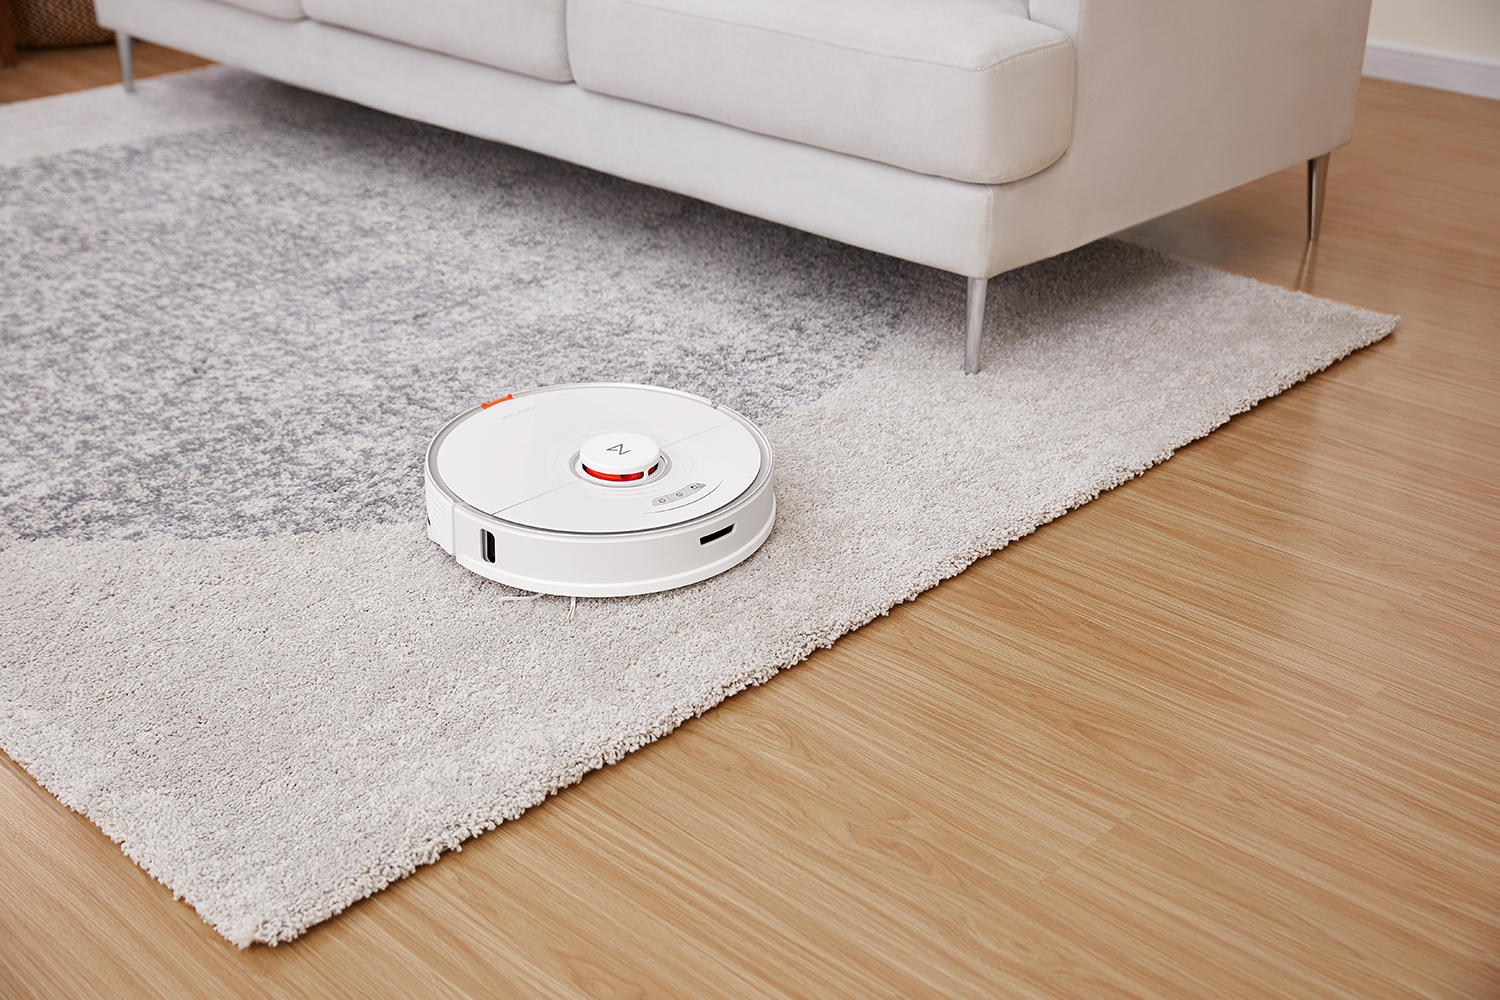 New Roborock S7 Robot Vacuum is Coming to Amazon this Month